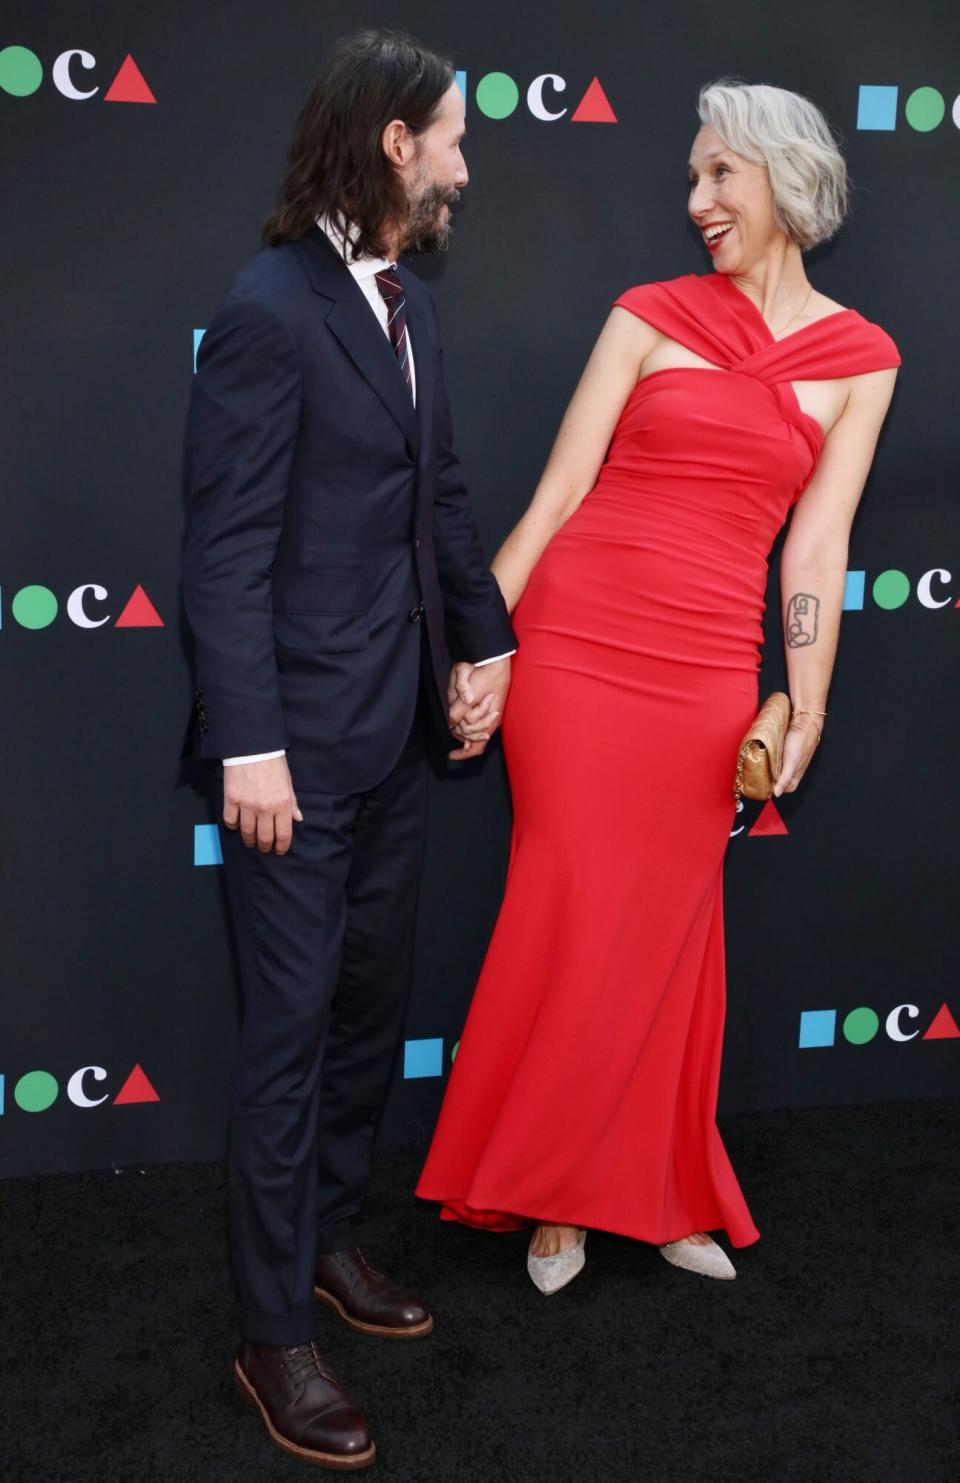 LOS ANGELES, CALIFORNIA - JUNE 04: Keanu Reeves and Alexandra Grant attend MOCA Gala 2022 at The Geffen Contemporary at MOCA on June 04, 2022 in Los Angeles, California. (Photo by Robin L Marshall/Getty Images)